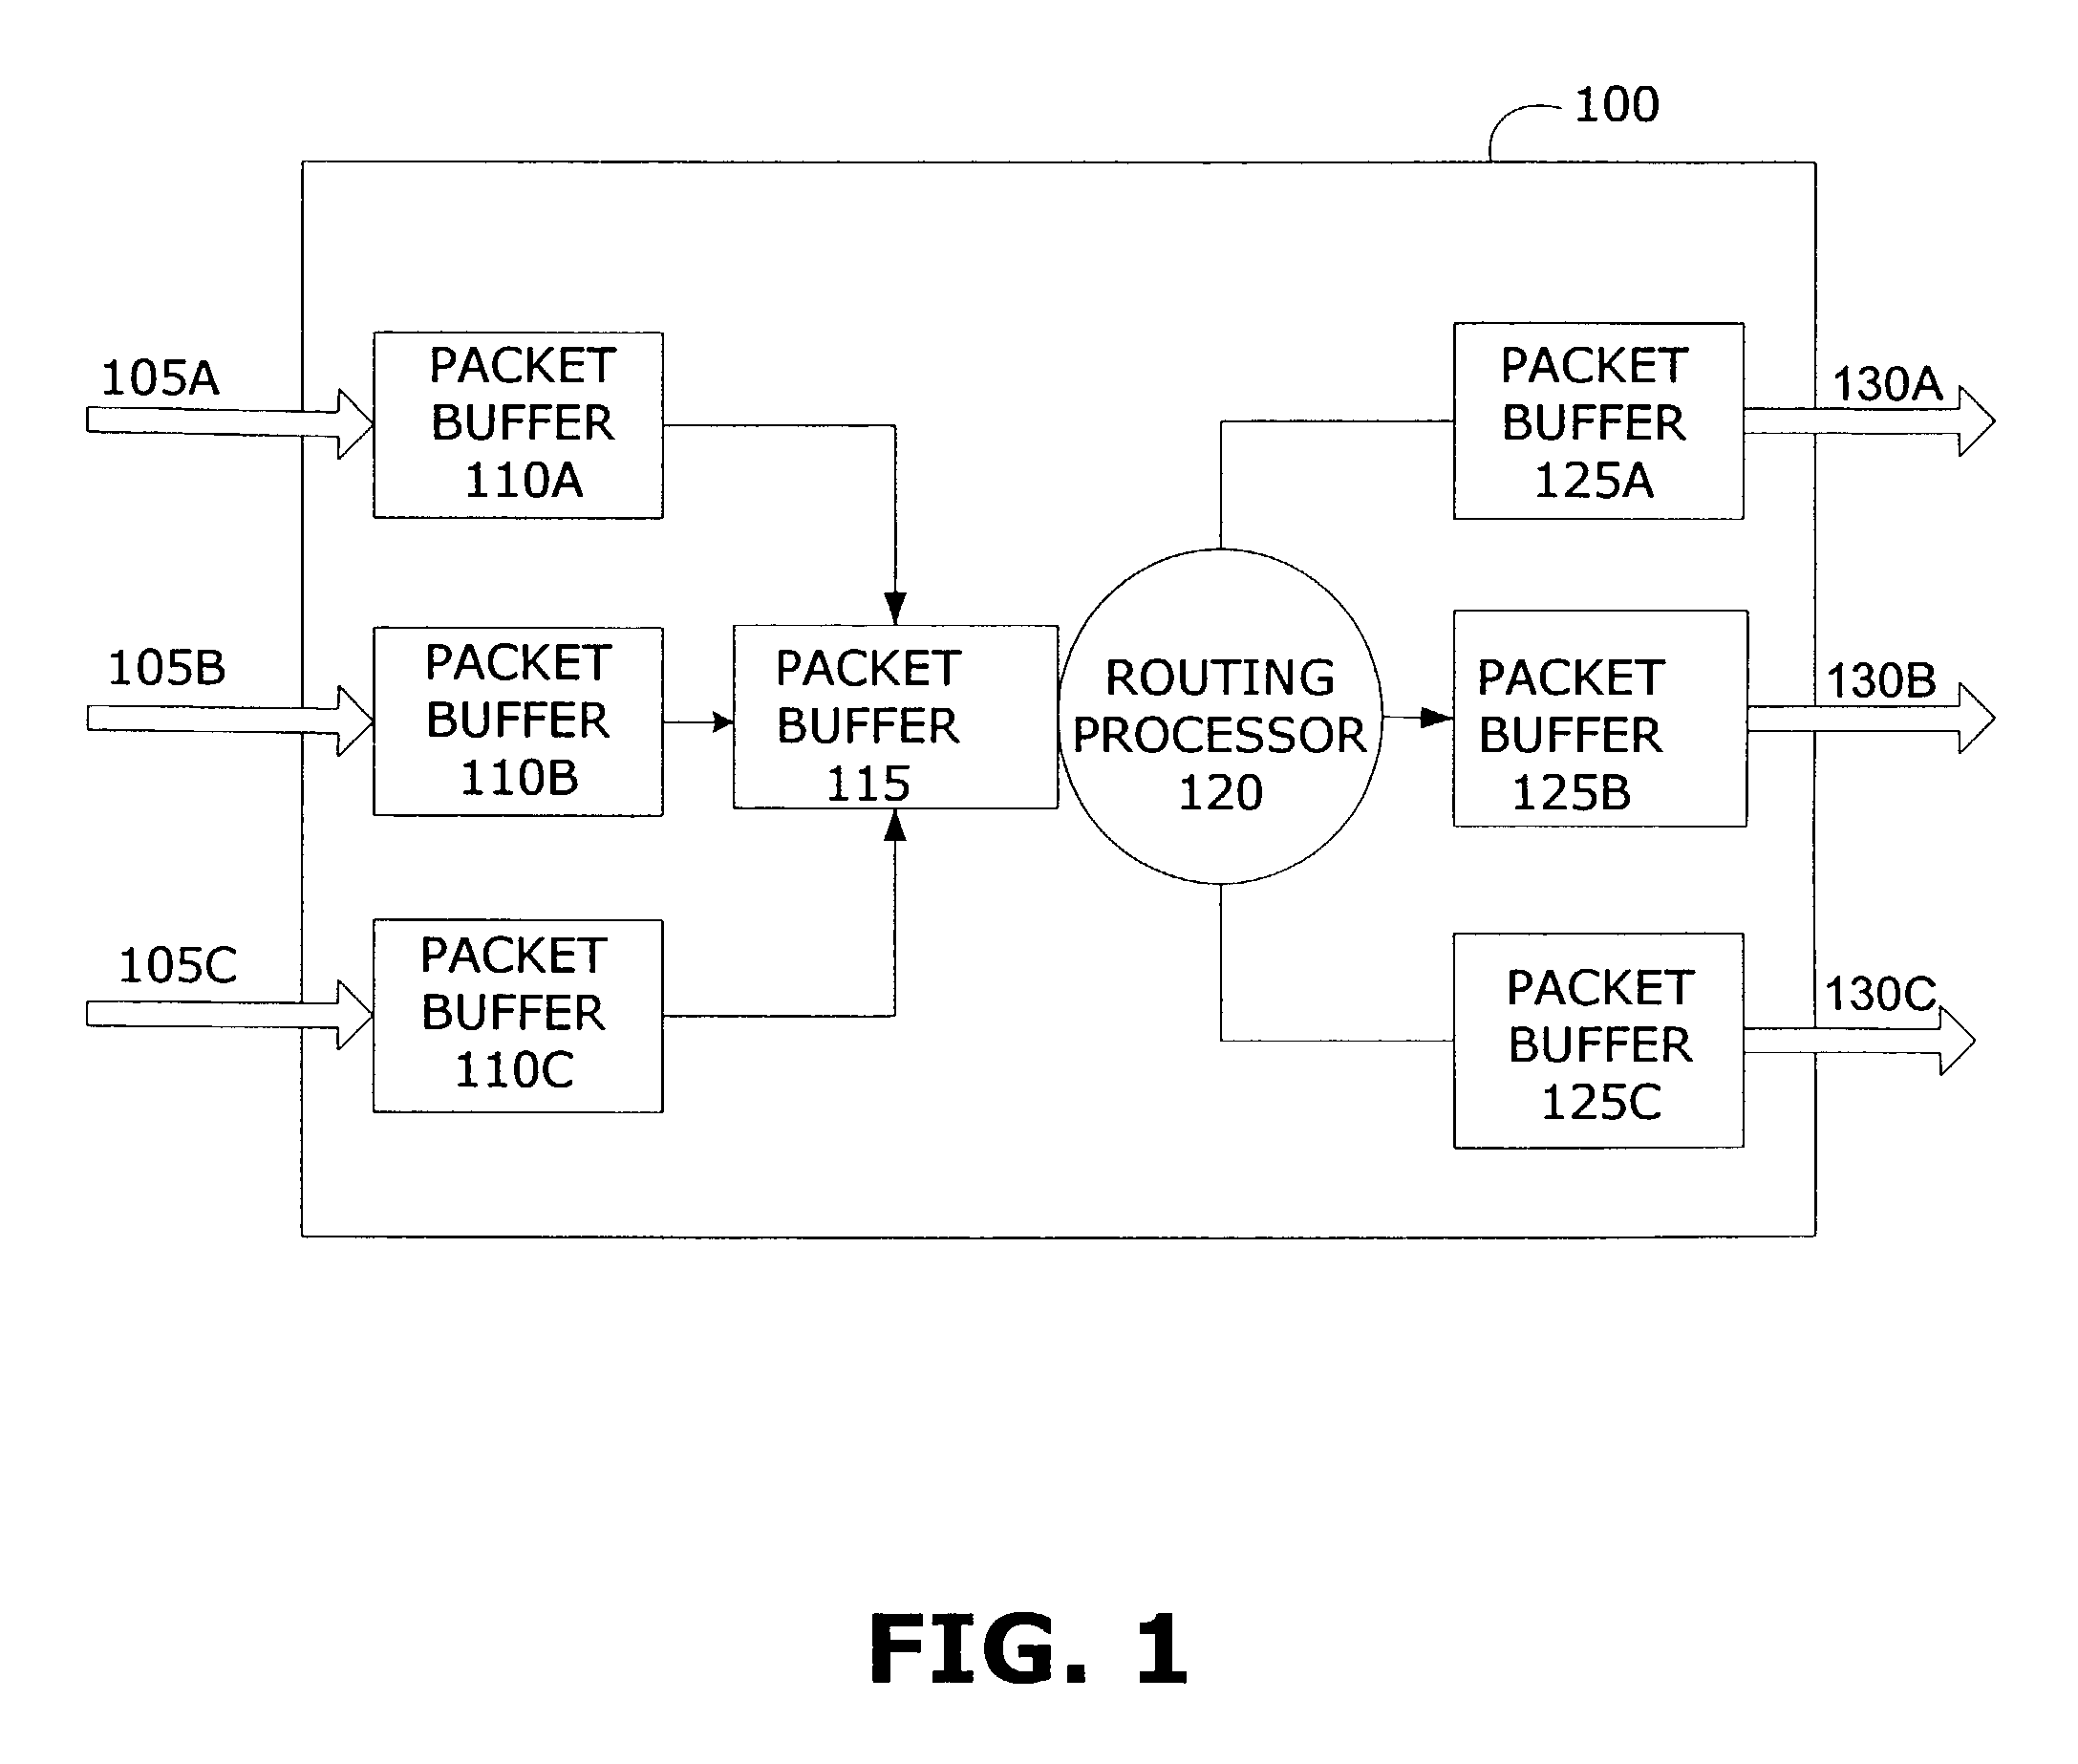 Selective packet discard apparatus and method